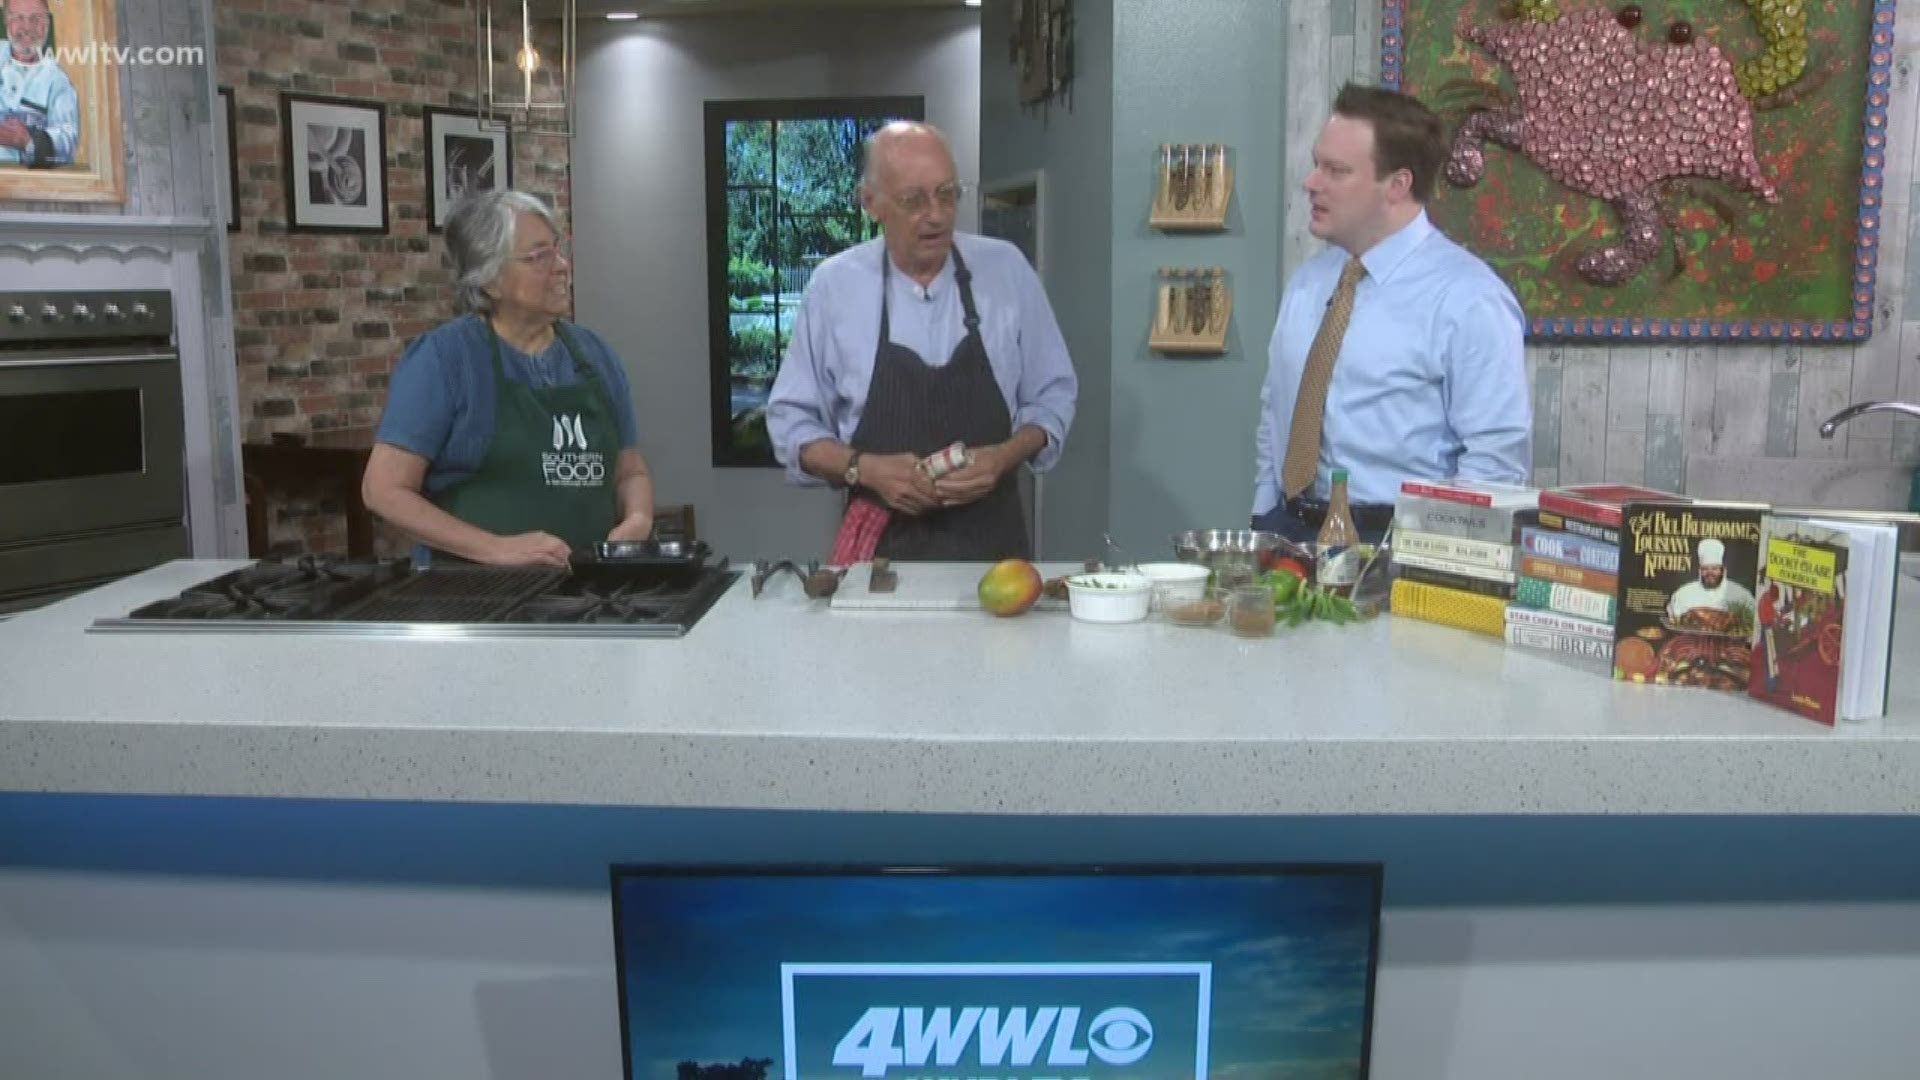 Even those of us who don't cook love a great cookbook and Kitchen Witch is the place to find vintage and new ones.  Philipe LaMancusa of Kitchen Witch and Liz Williams from the Southern Food & Beverage Museum cook a dish from a cookbook and talk about what the latest plans for Kitchen Witch are.